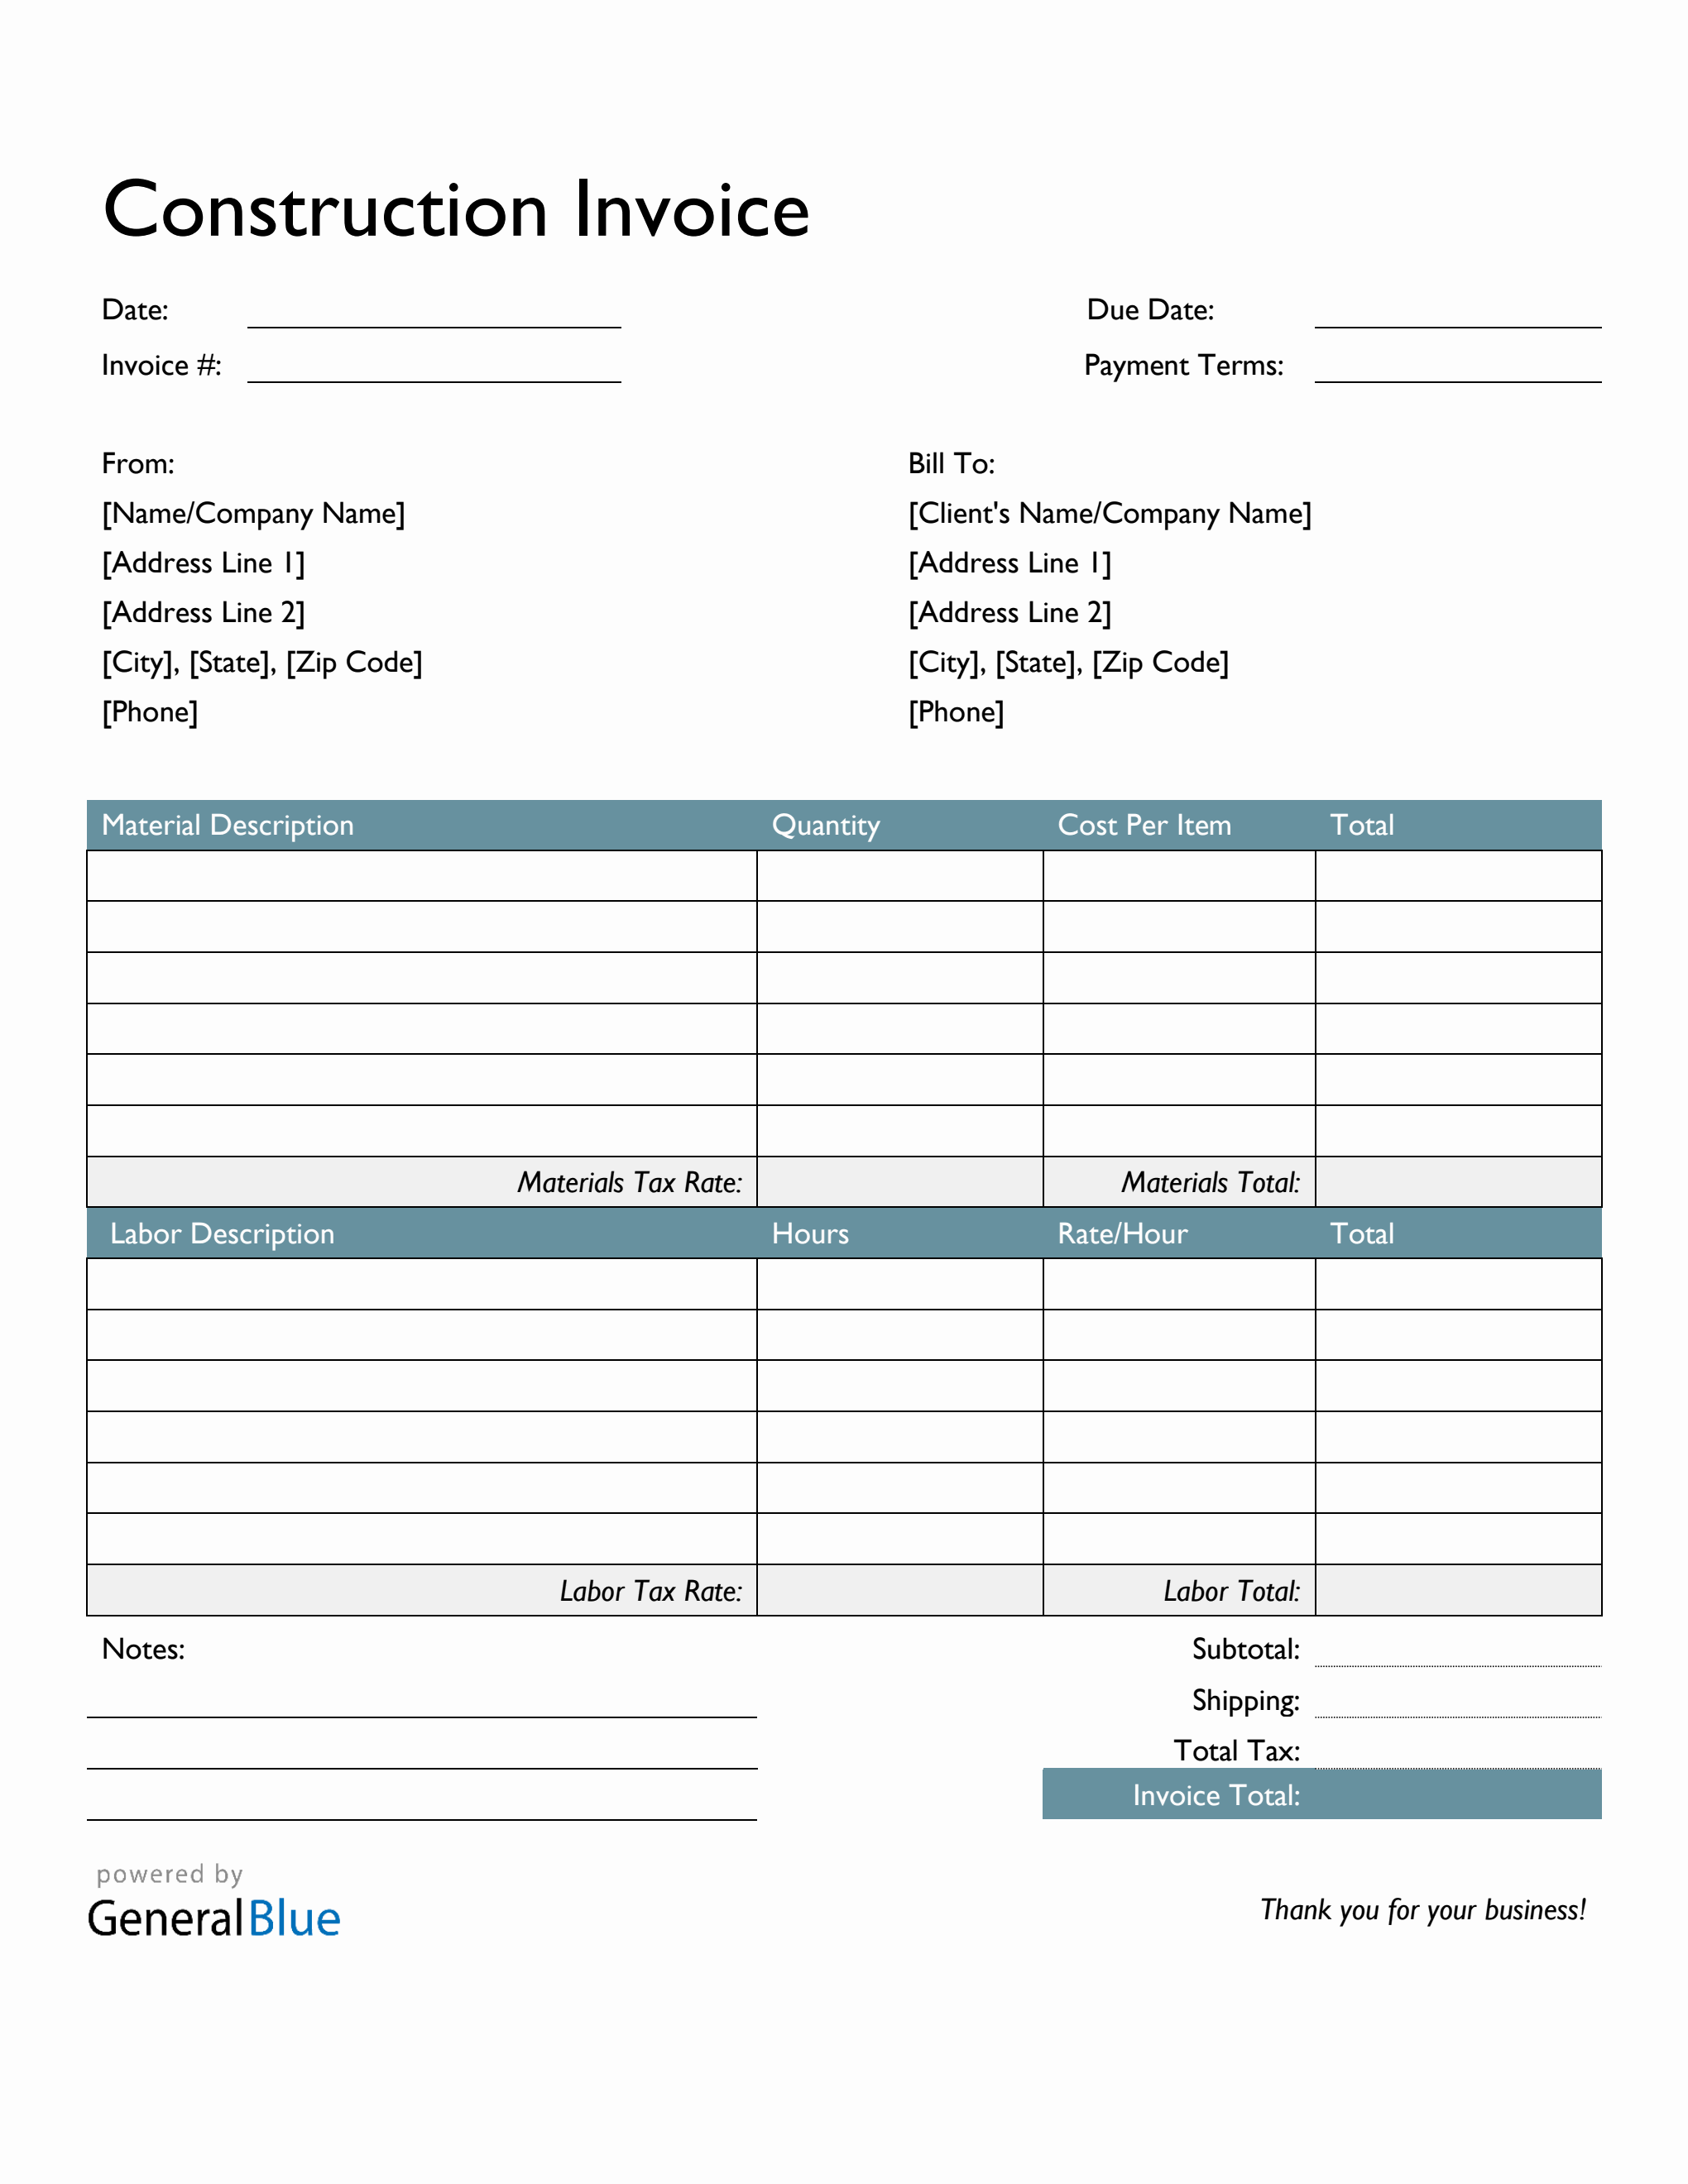 construction invoice template in word colorful